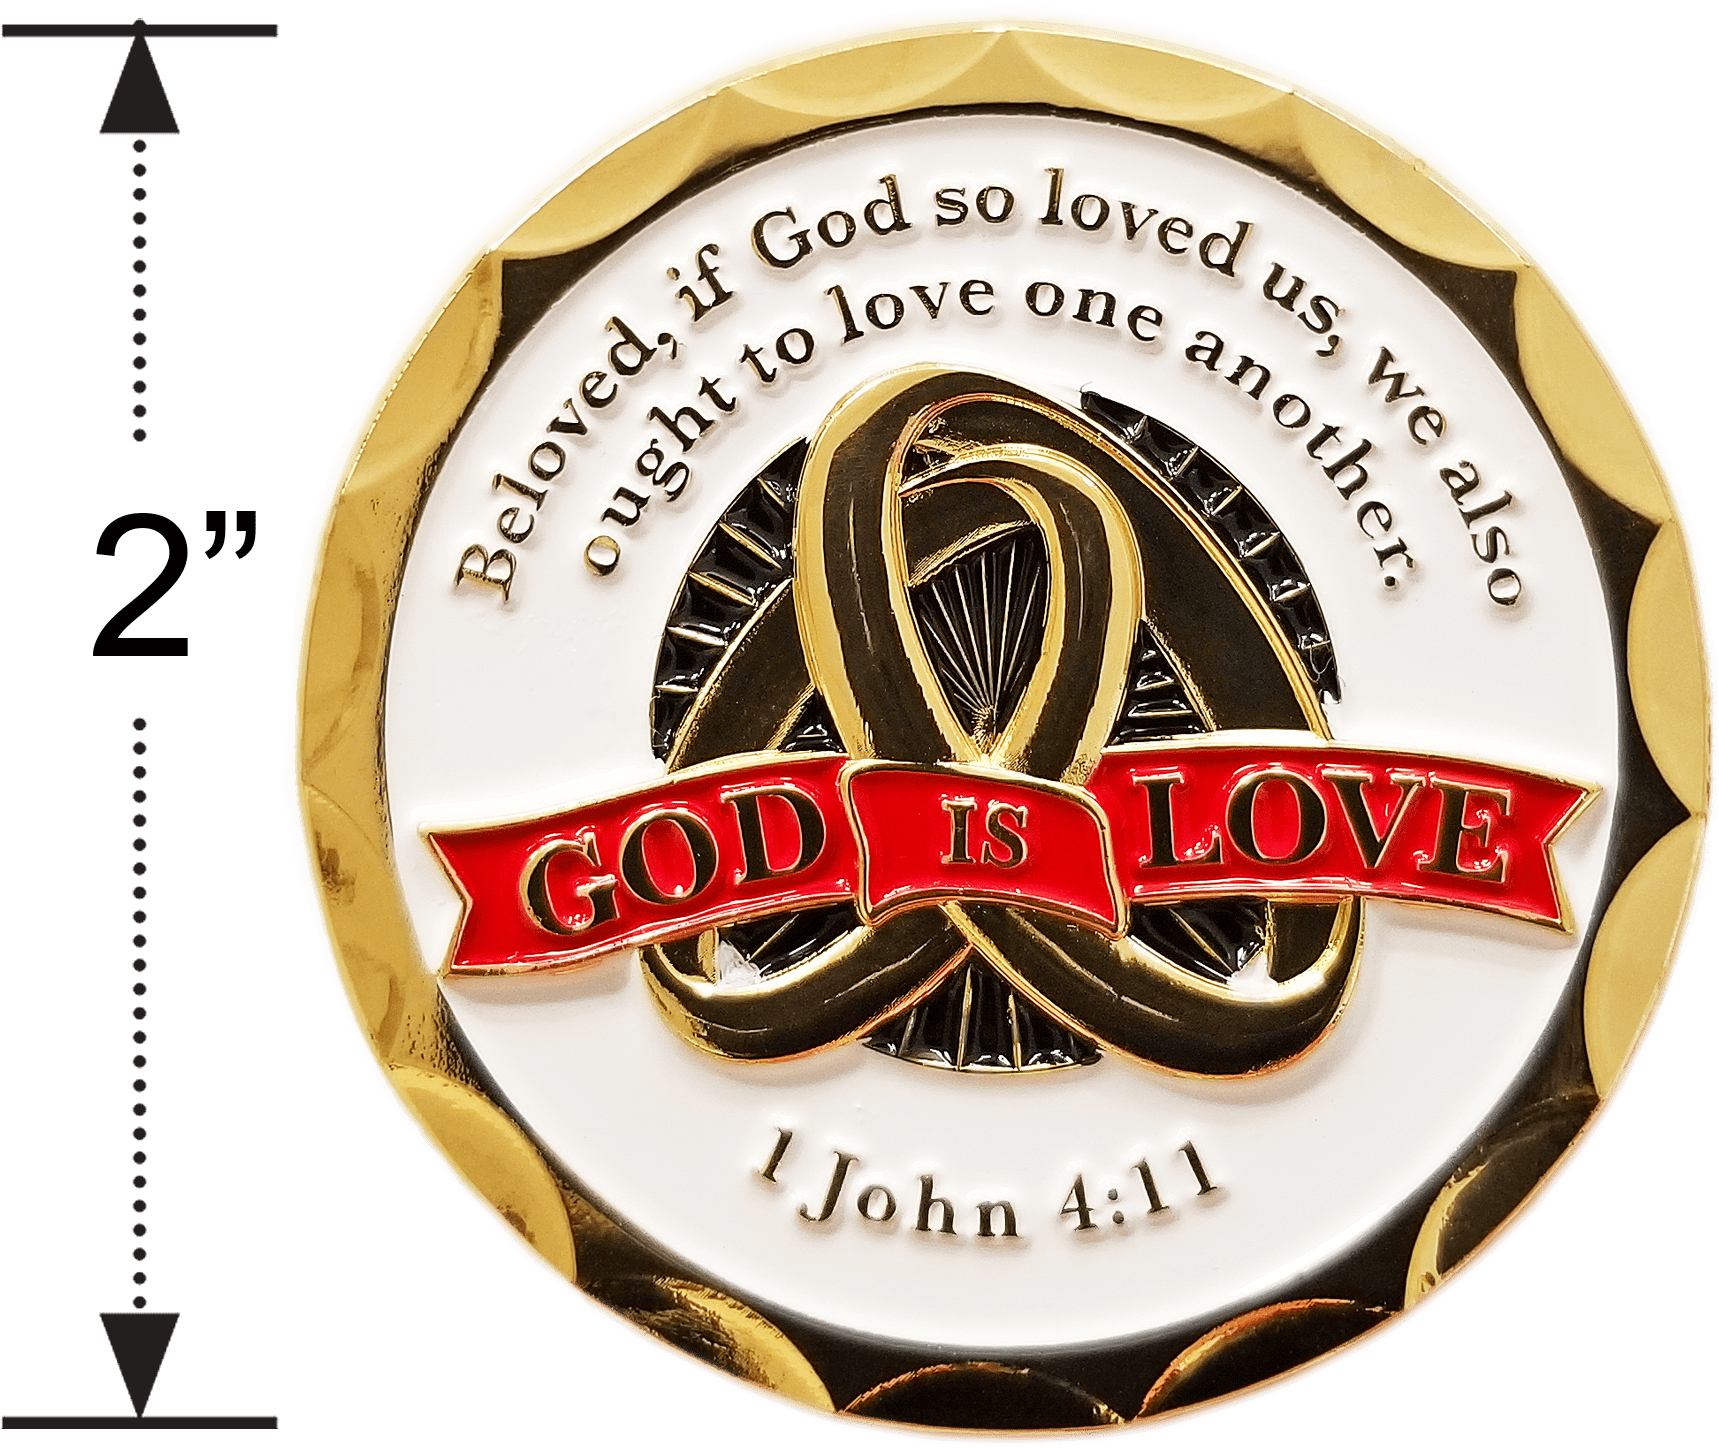 God is Love Gold Plated Christian Challenge Coin with size diameter 